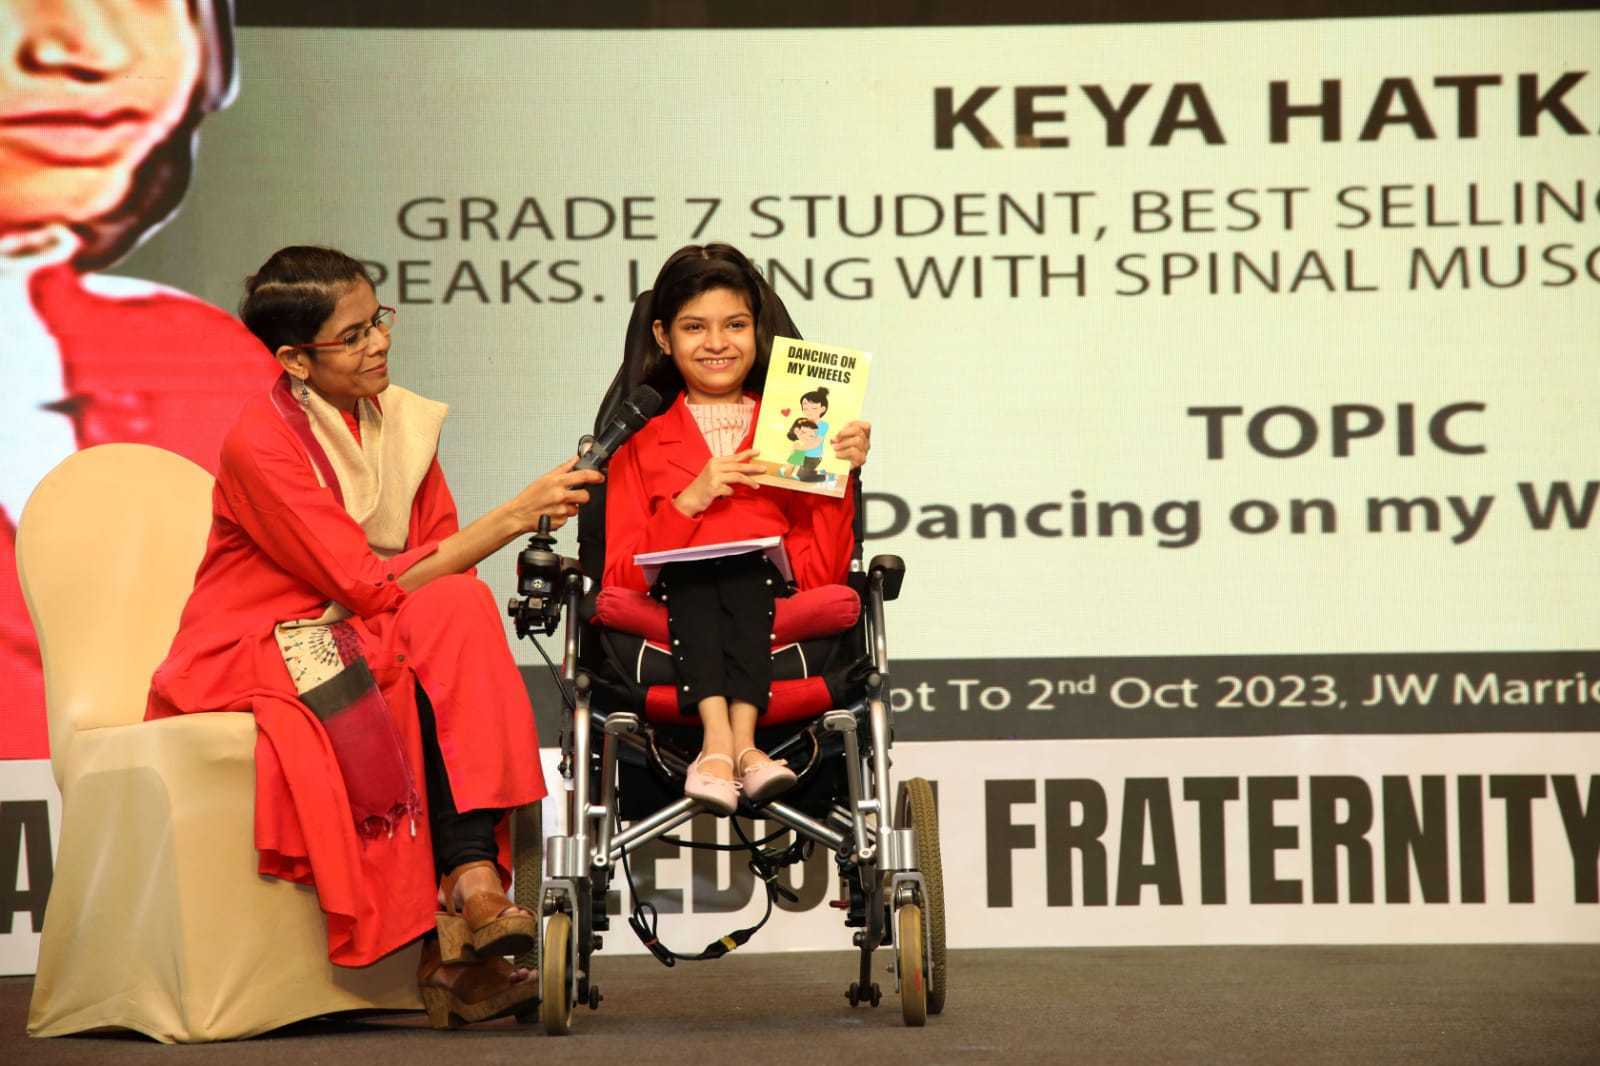 Keya frequently gives talks about her journey battling spinal muscular atrophy